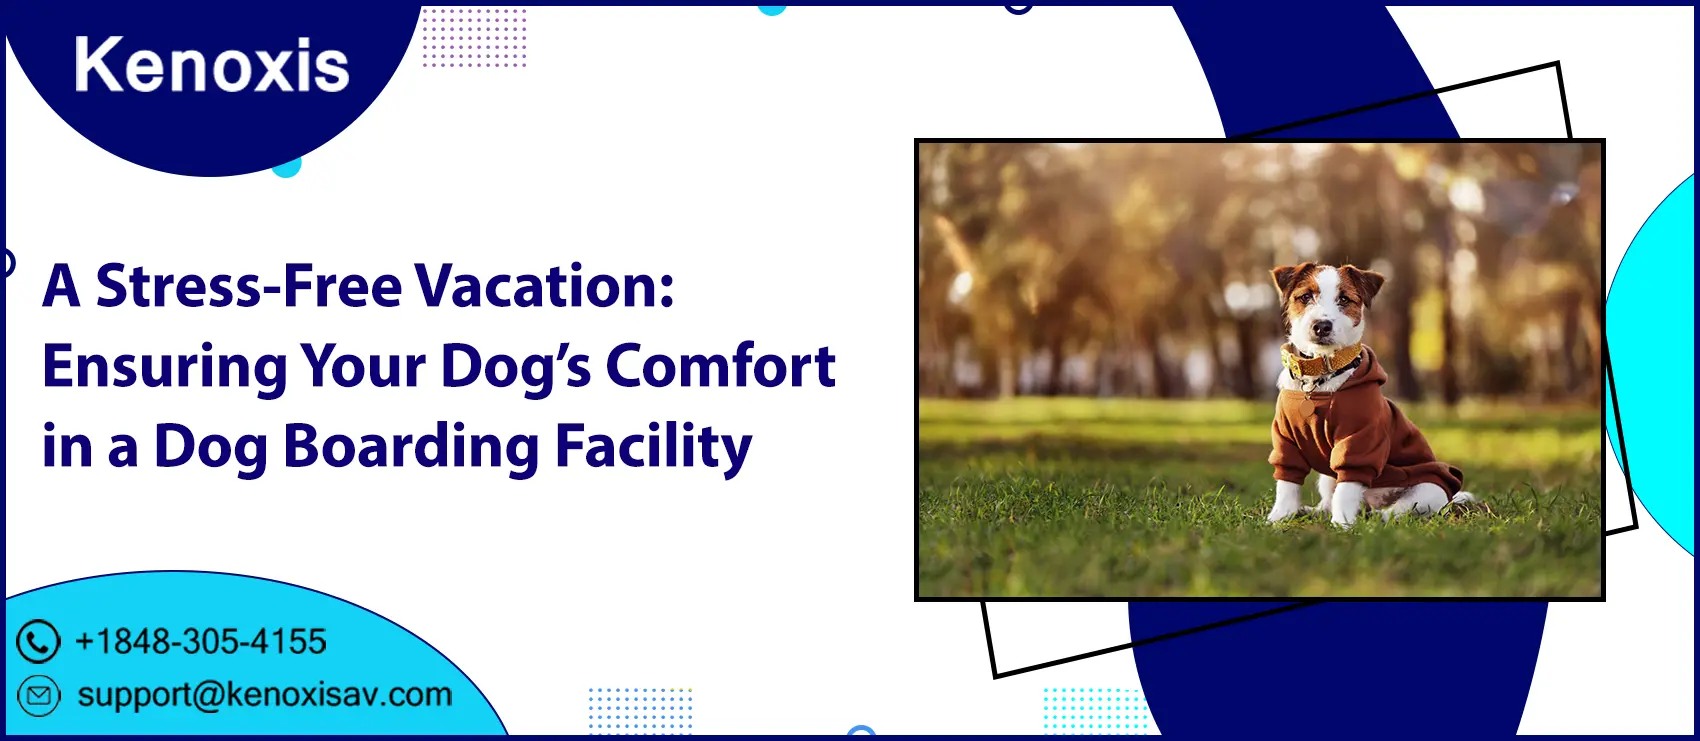 A Stress-Free Vacation: Ensuring Your Dog’s Comfort in a Dog Boarding Facility 